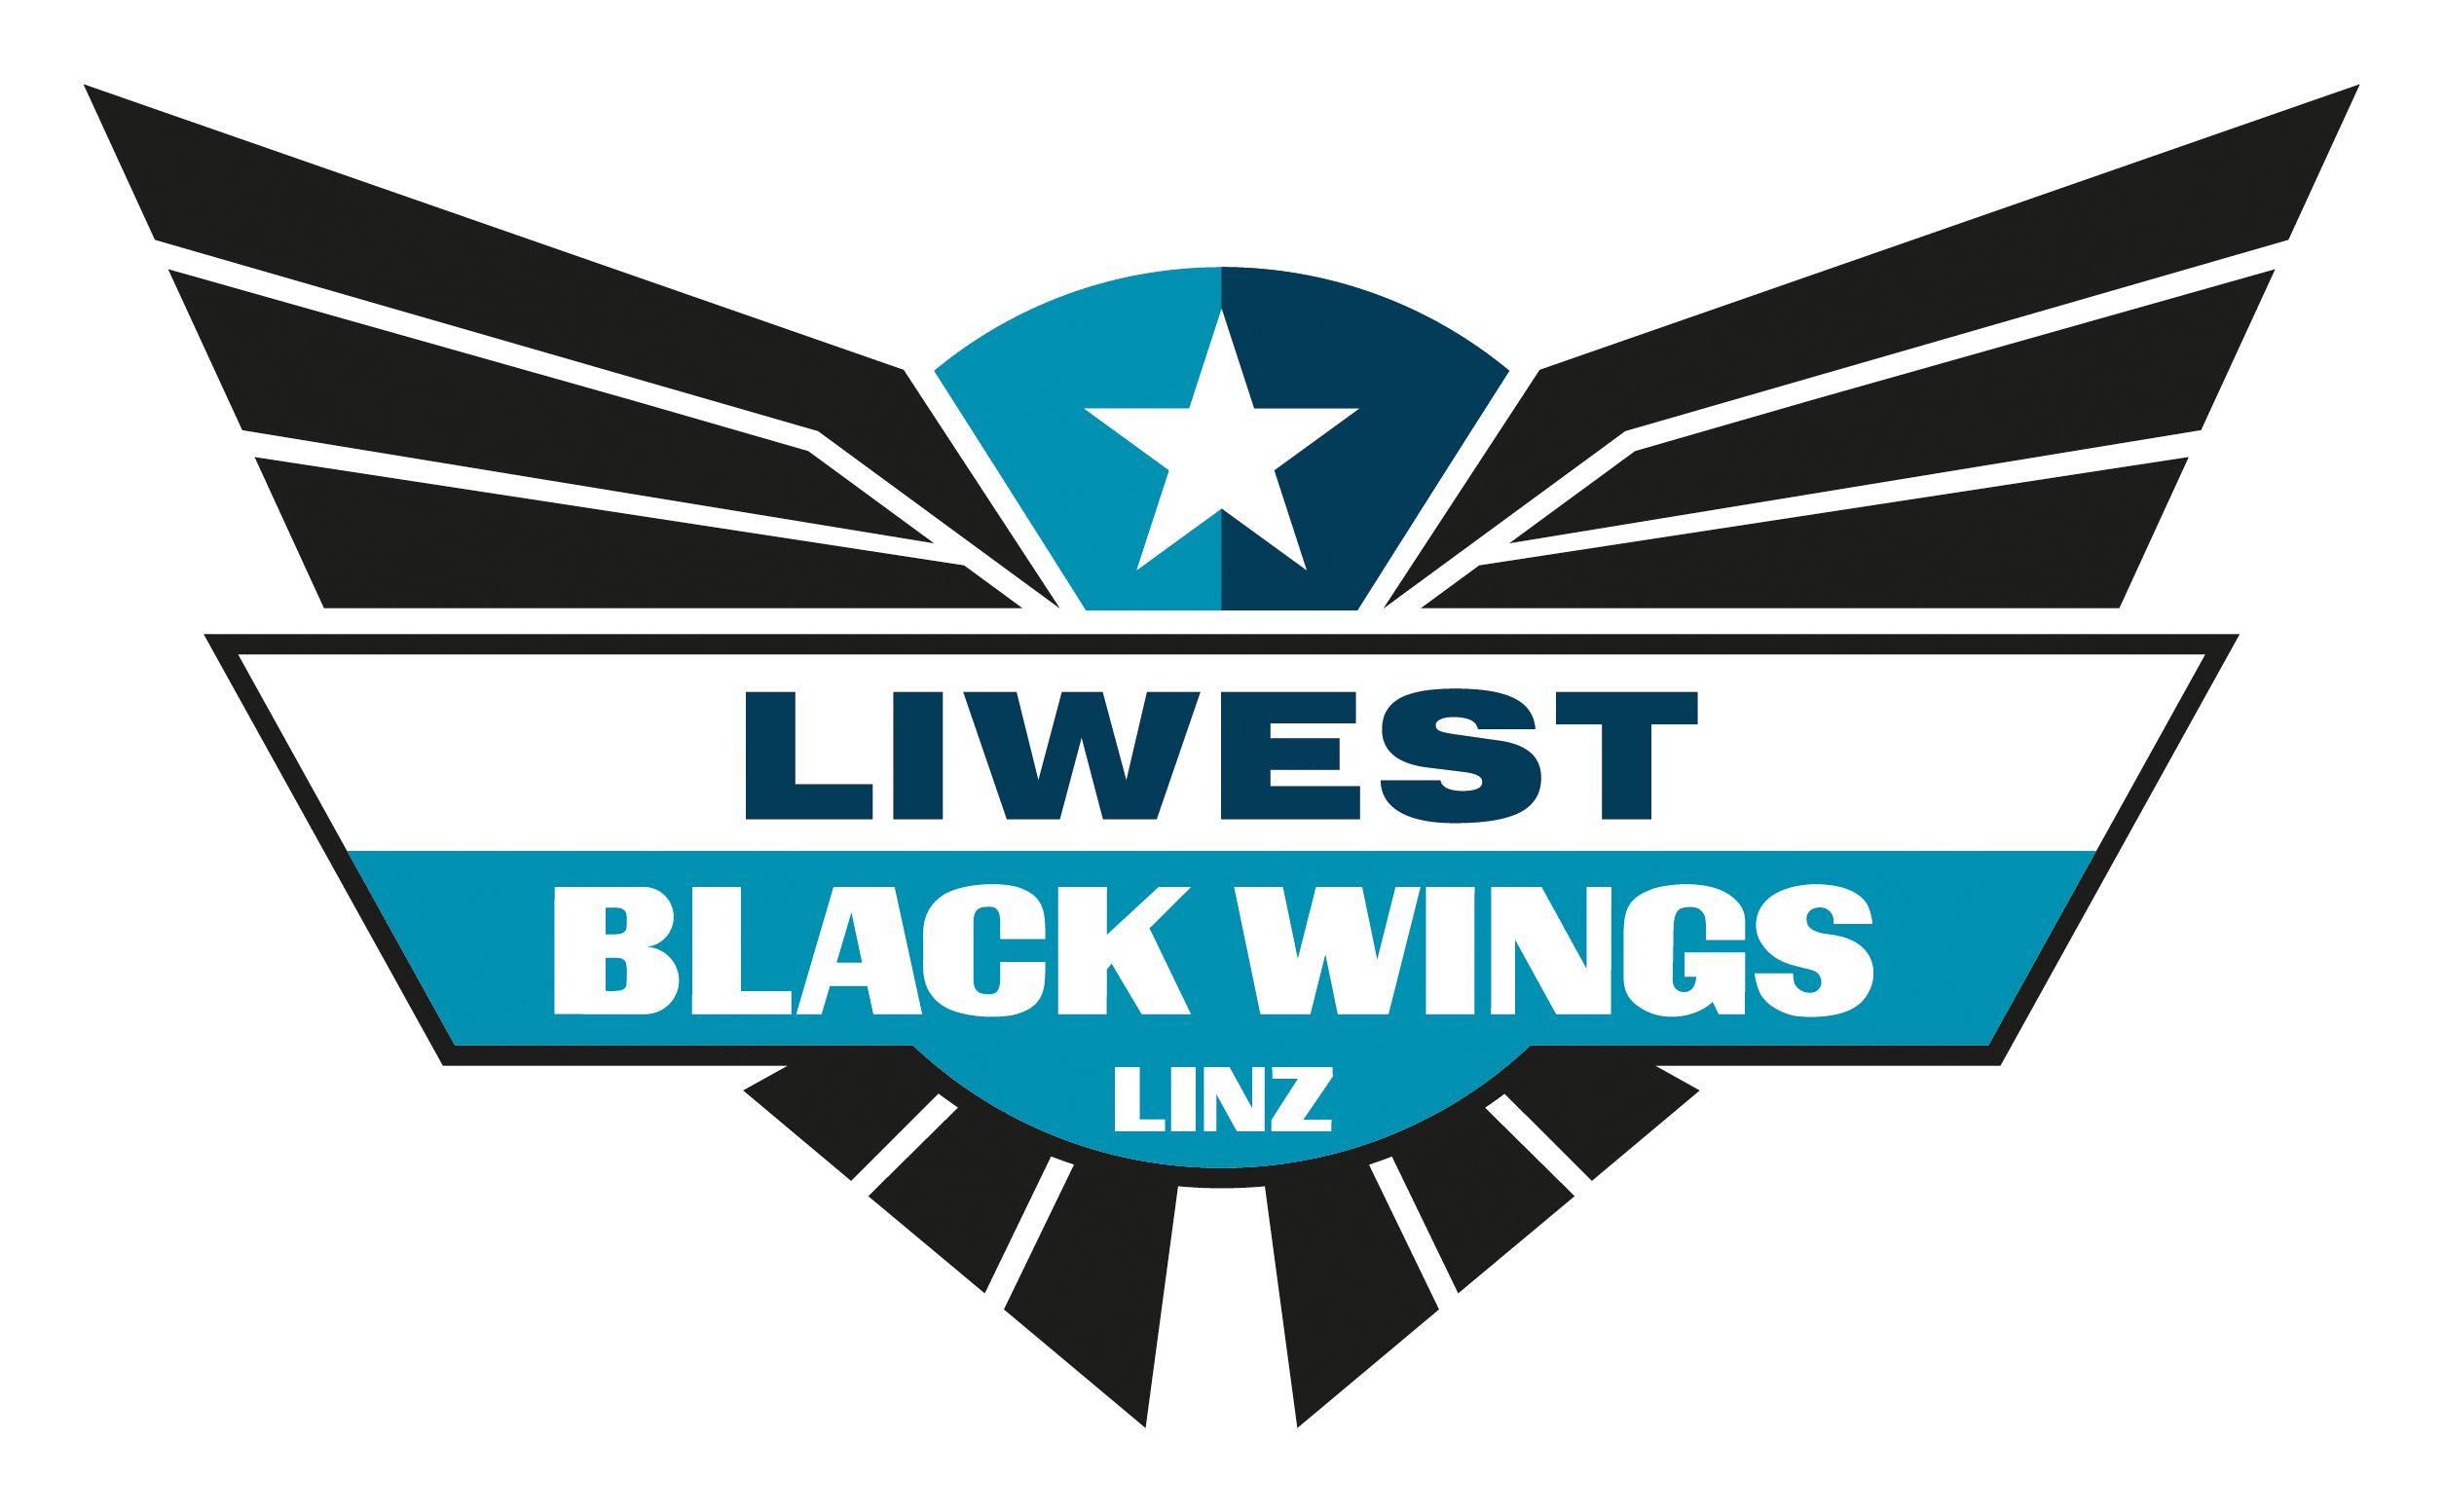 Wings Logo - Linz: The Black Wings have a new logo